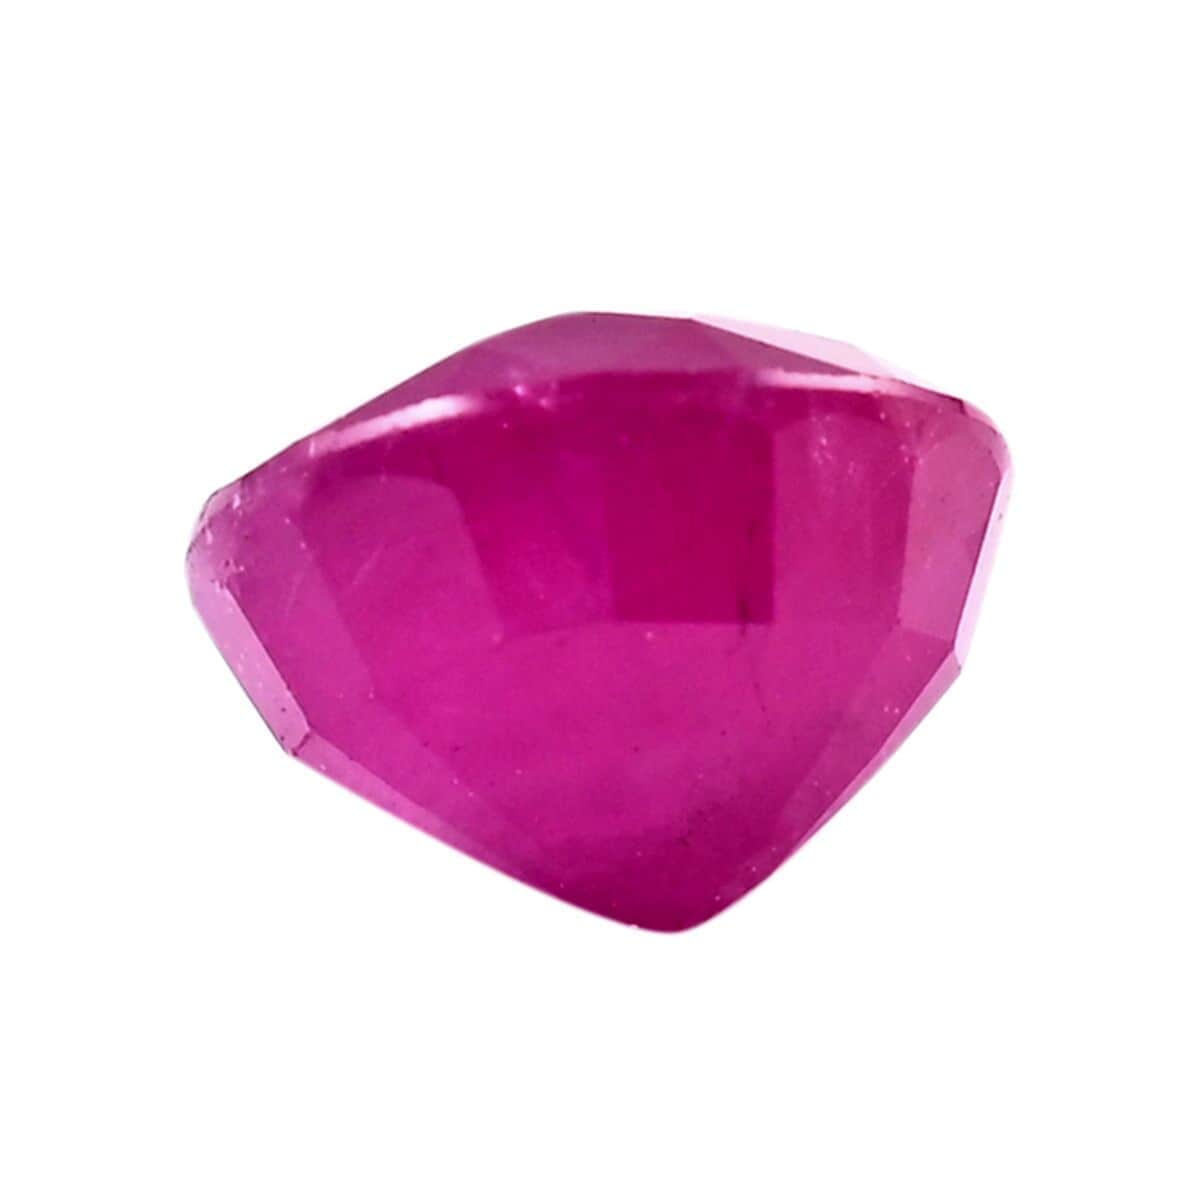 AAAA Mozambique Ruby (Rnd 6 mm) 1.00 ctw, Loose Gemstones, Gemstone For Jewelry, Jewelry Stones, Loose Ruby For Jewelry Making image number 2